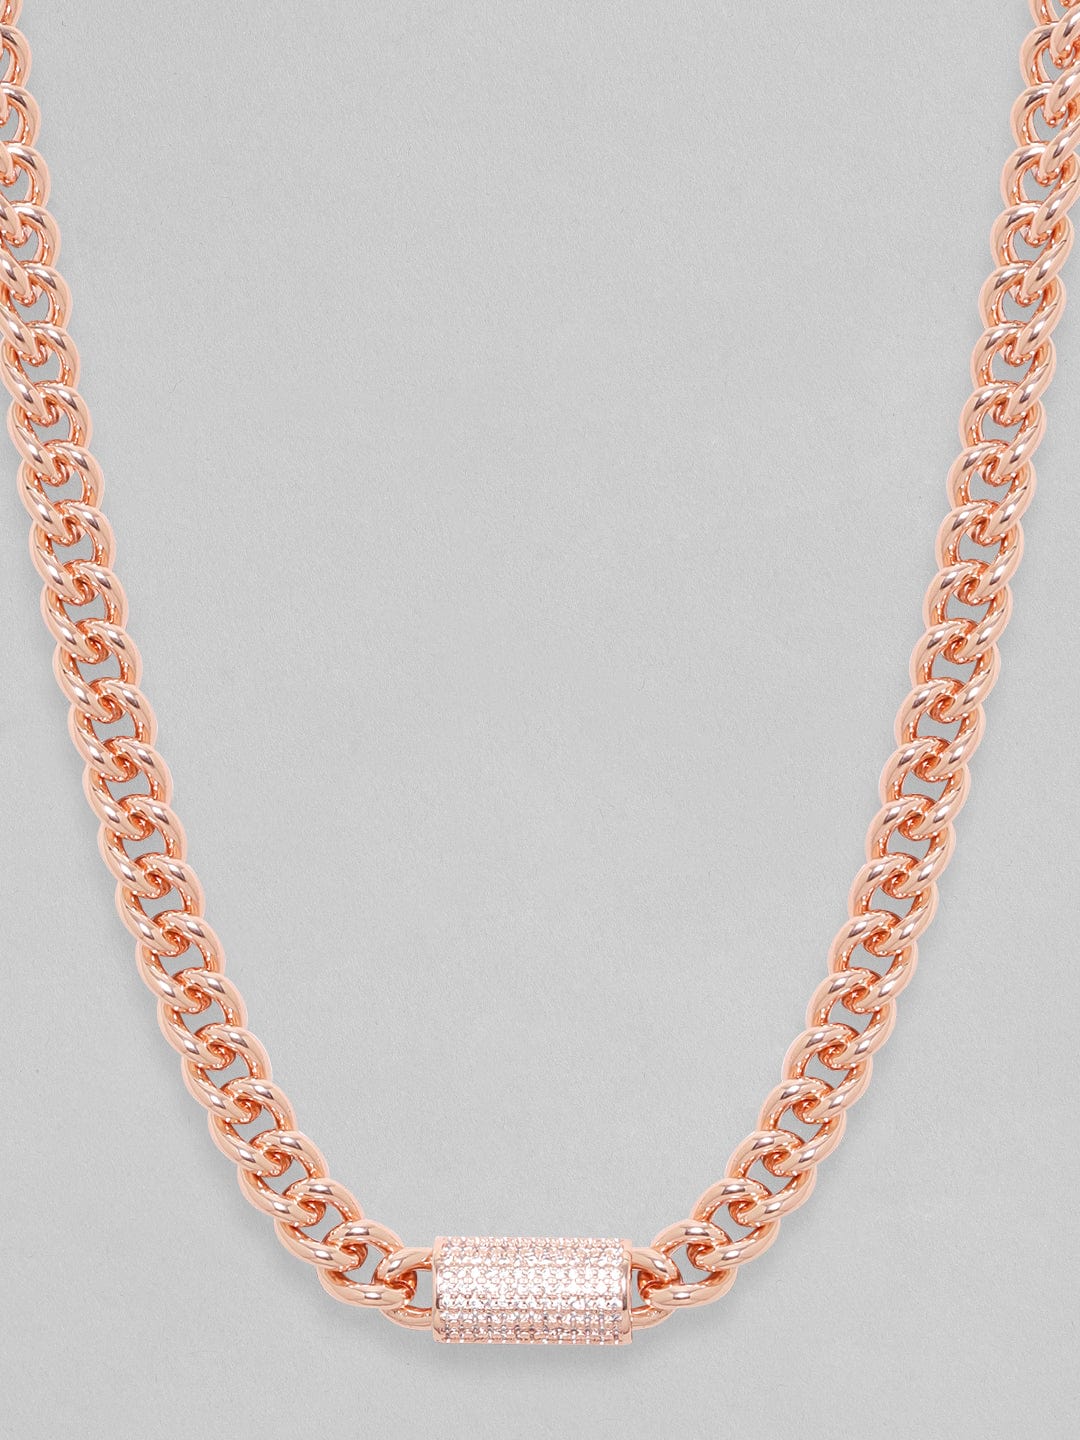 18K Rose Gold Cuban Chain Premium Crystal Studded Necklace Chain & Necklaces